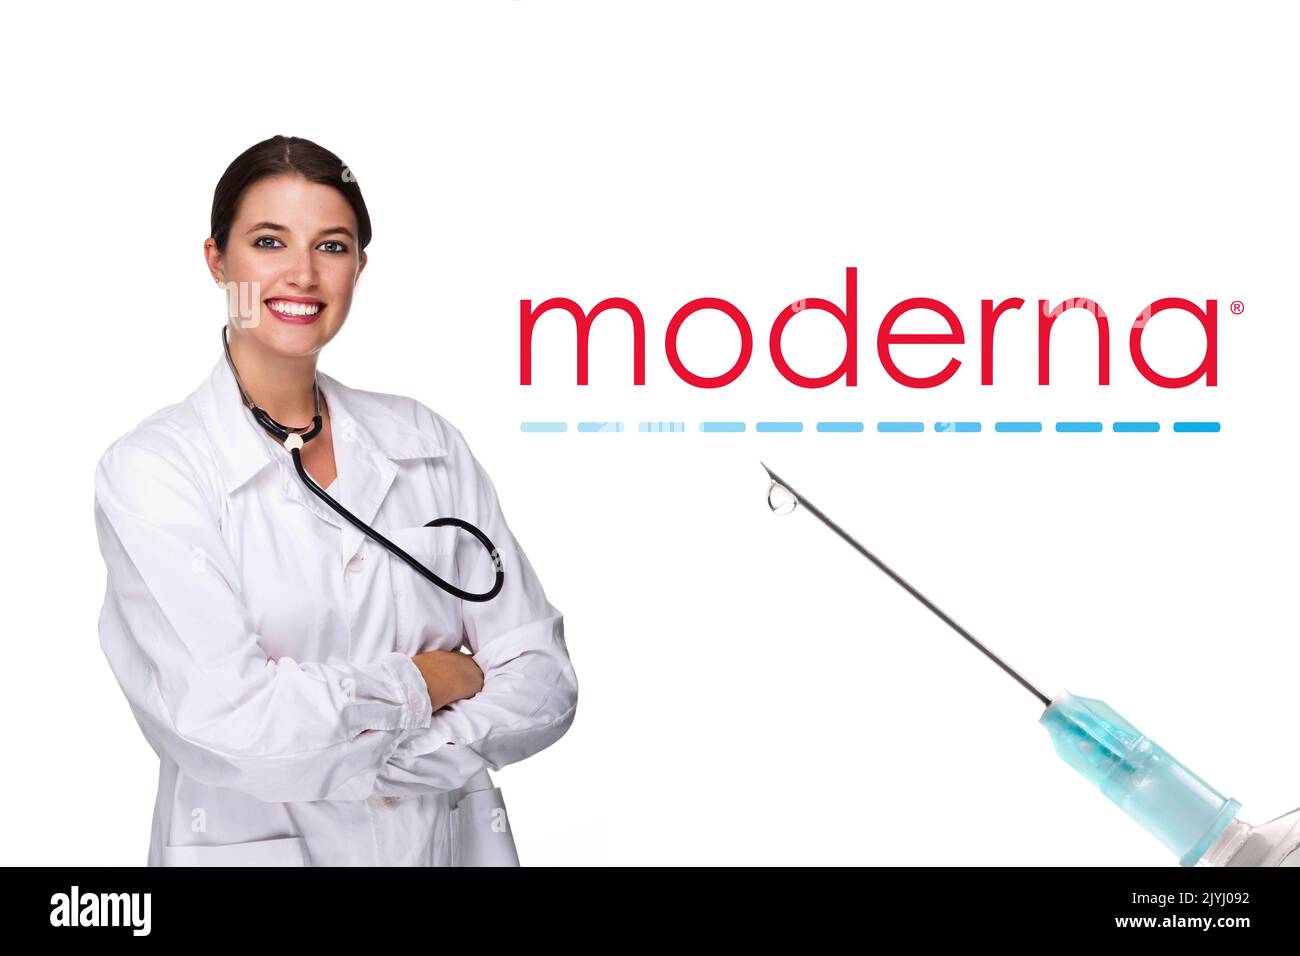 female doctor with stethoscope and logo of moderna, MR=Yes Stock Photo